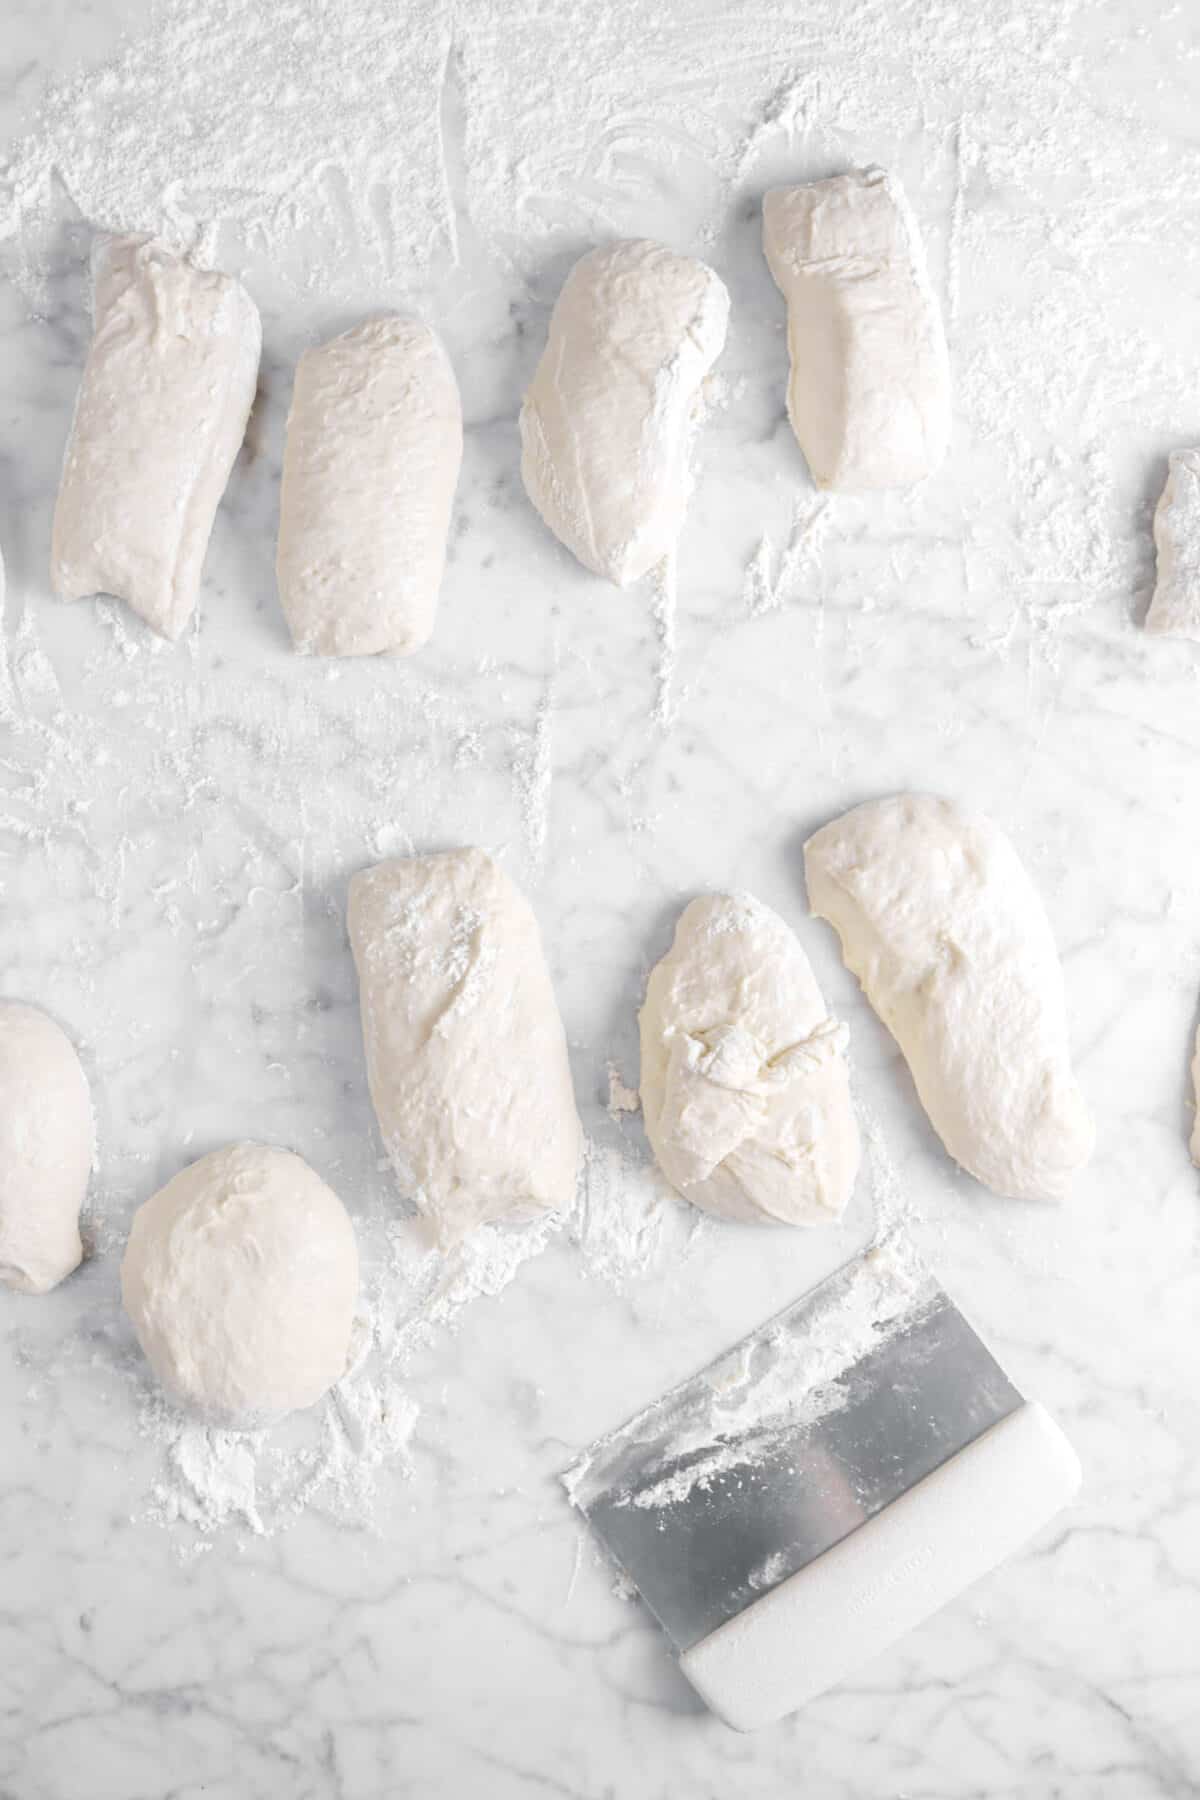 dough cut into nine pieces with pastry knife on marble counter